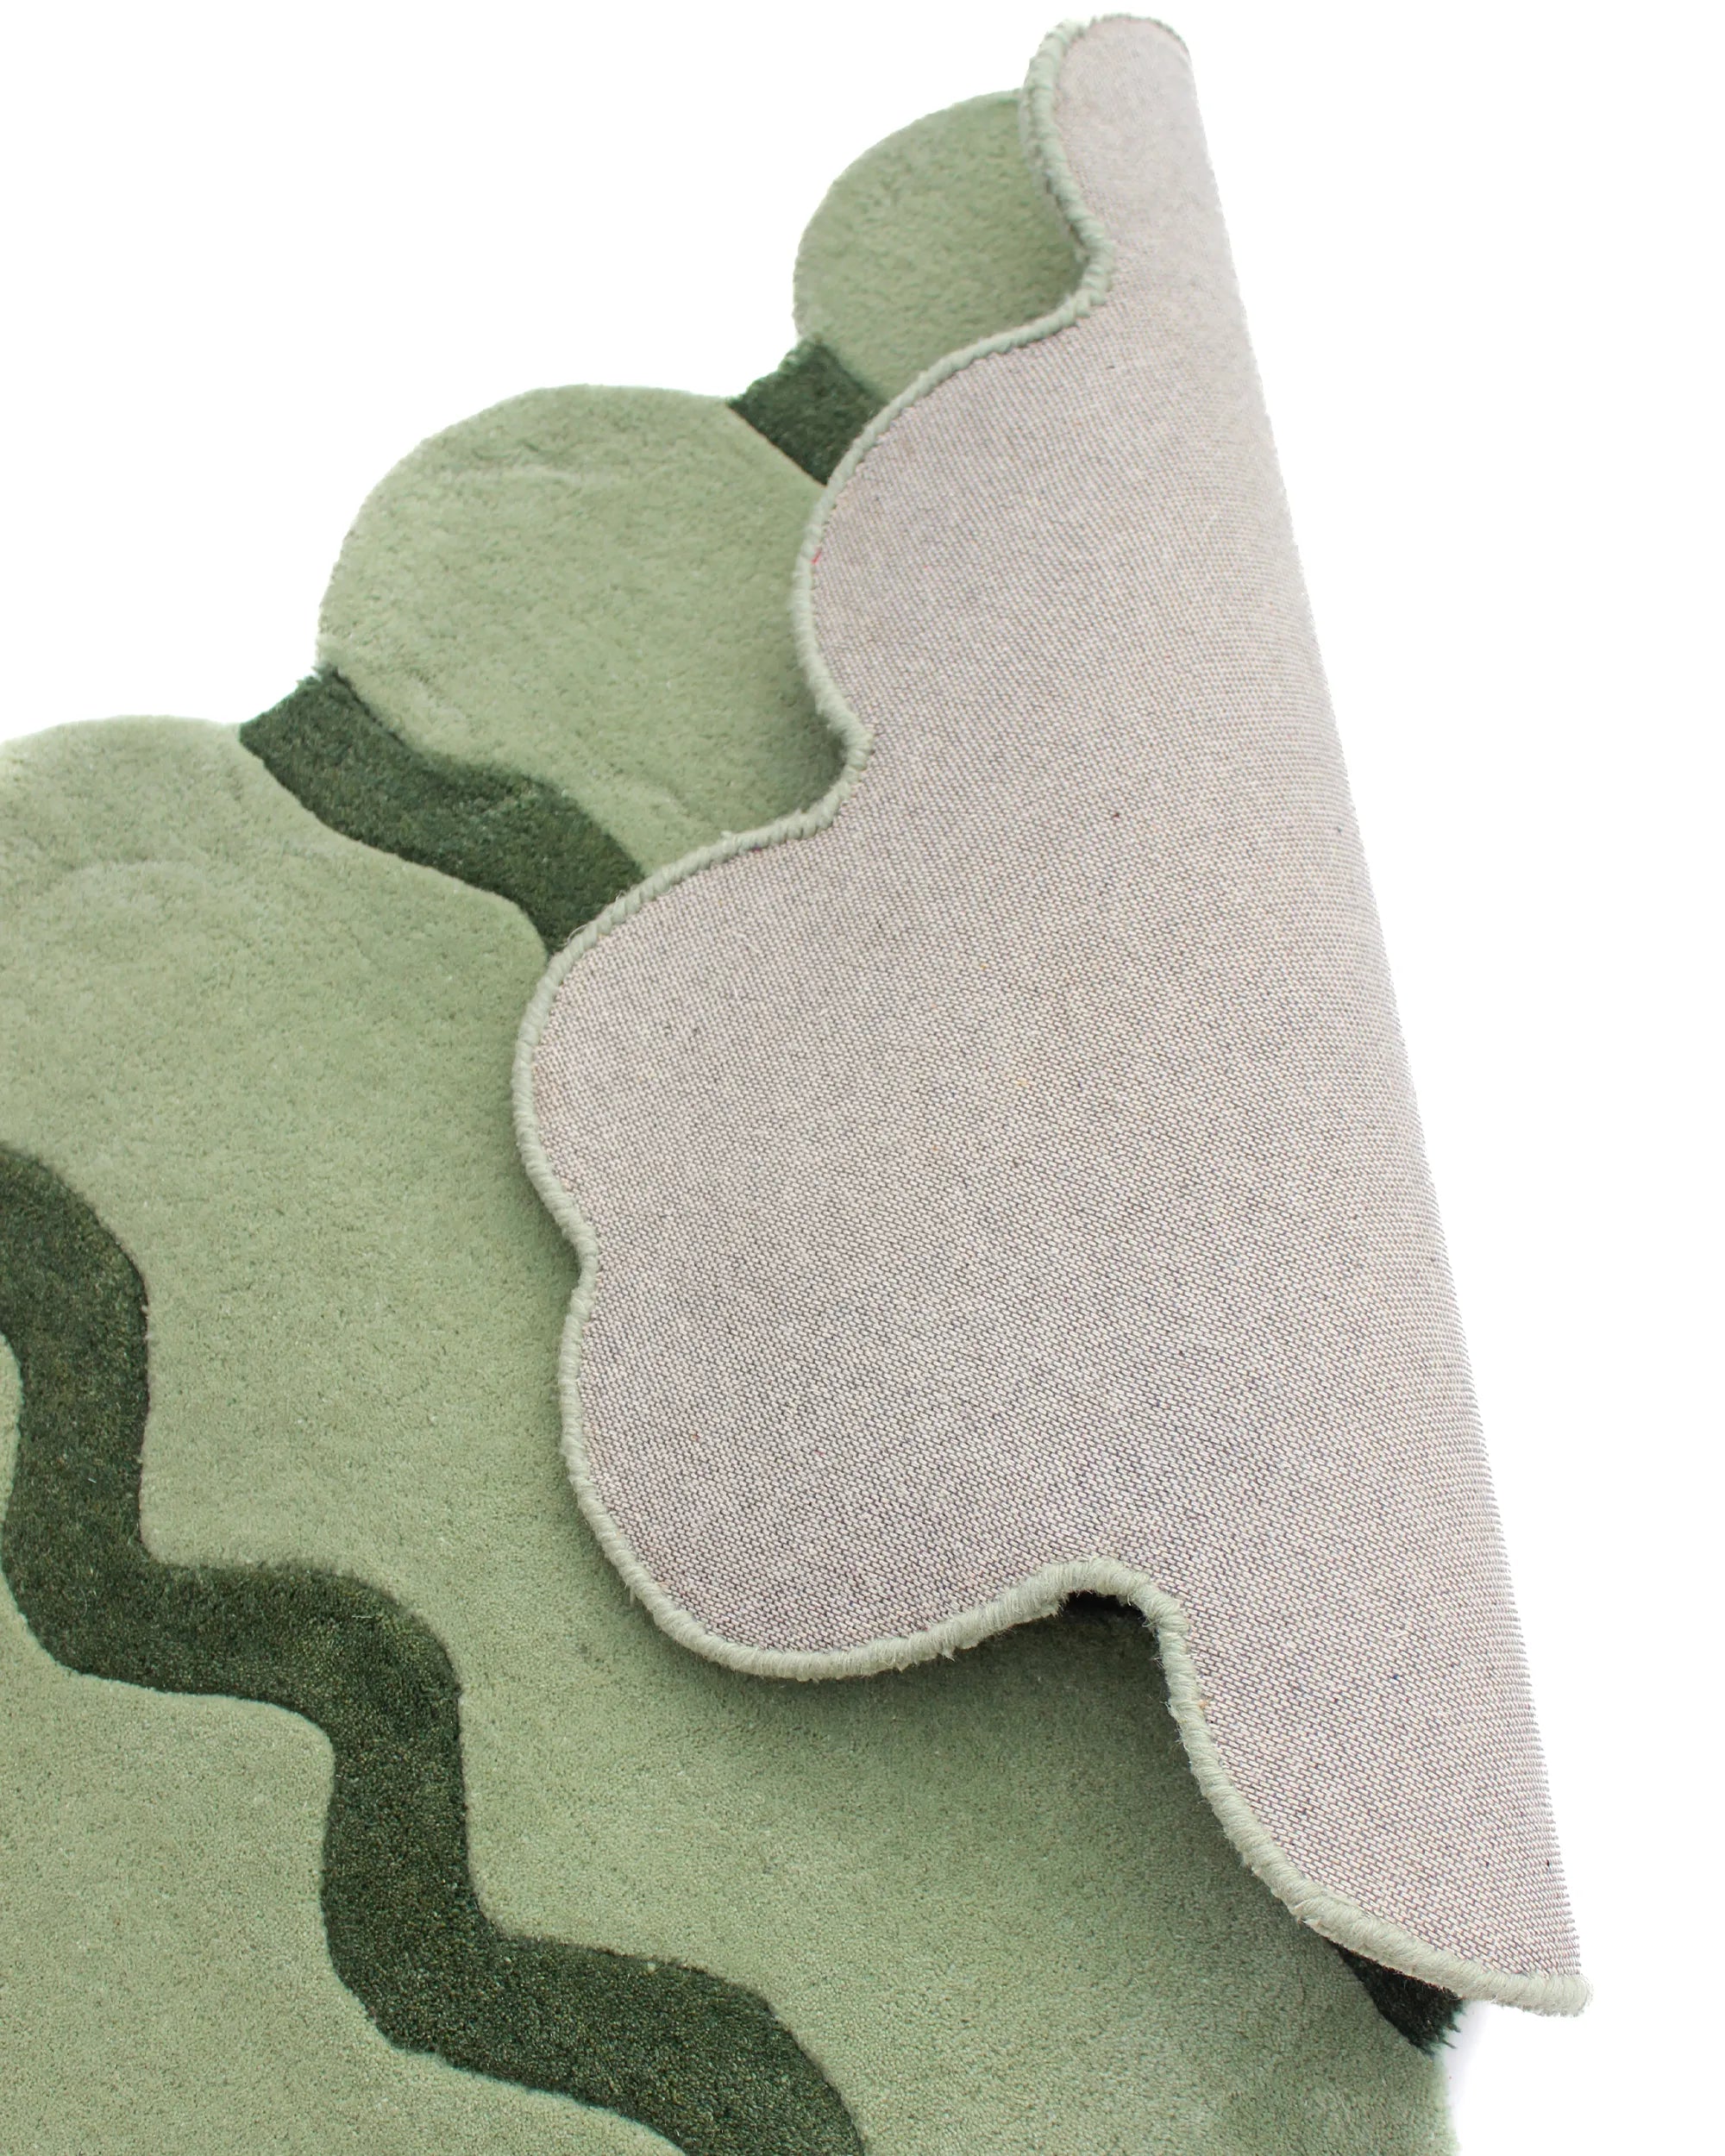 Close-up view showing the unique sculpted edges and thin wiggly stripes of the Sculpted Edge Hand Tufted Wool Rug